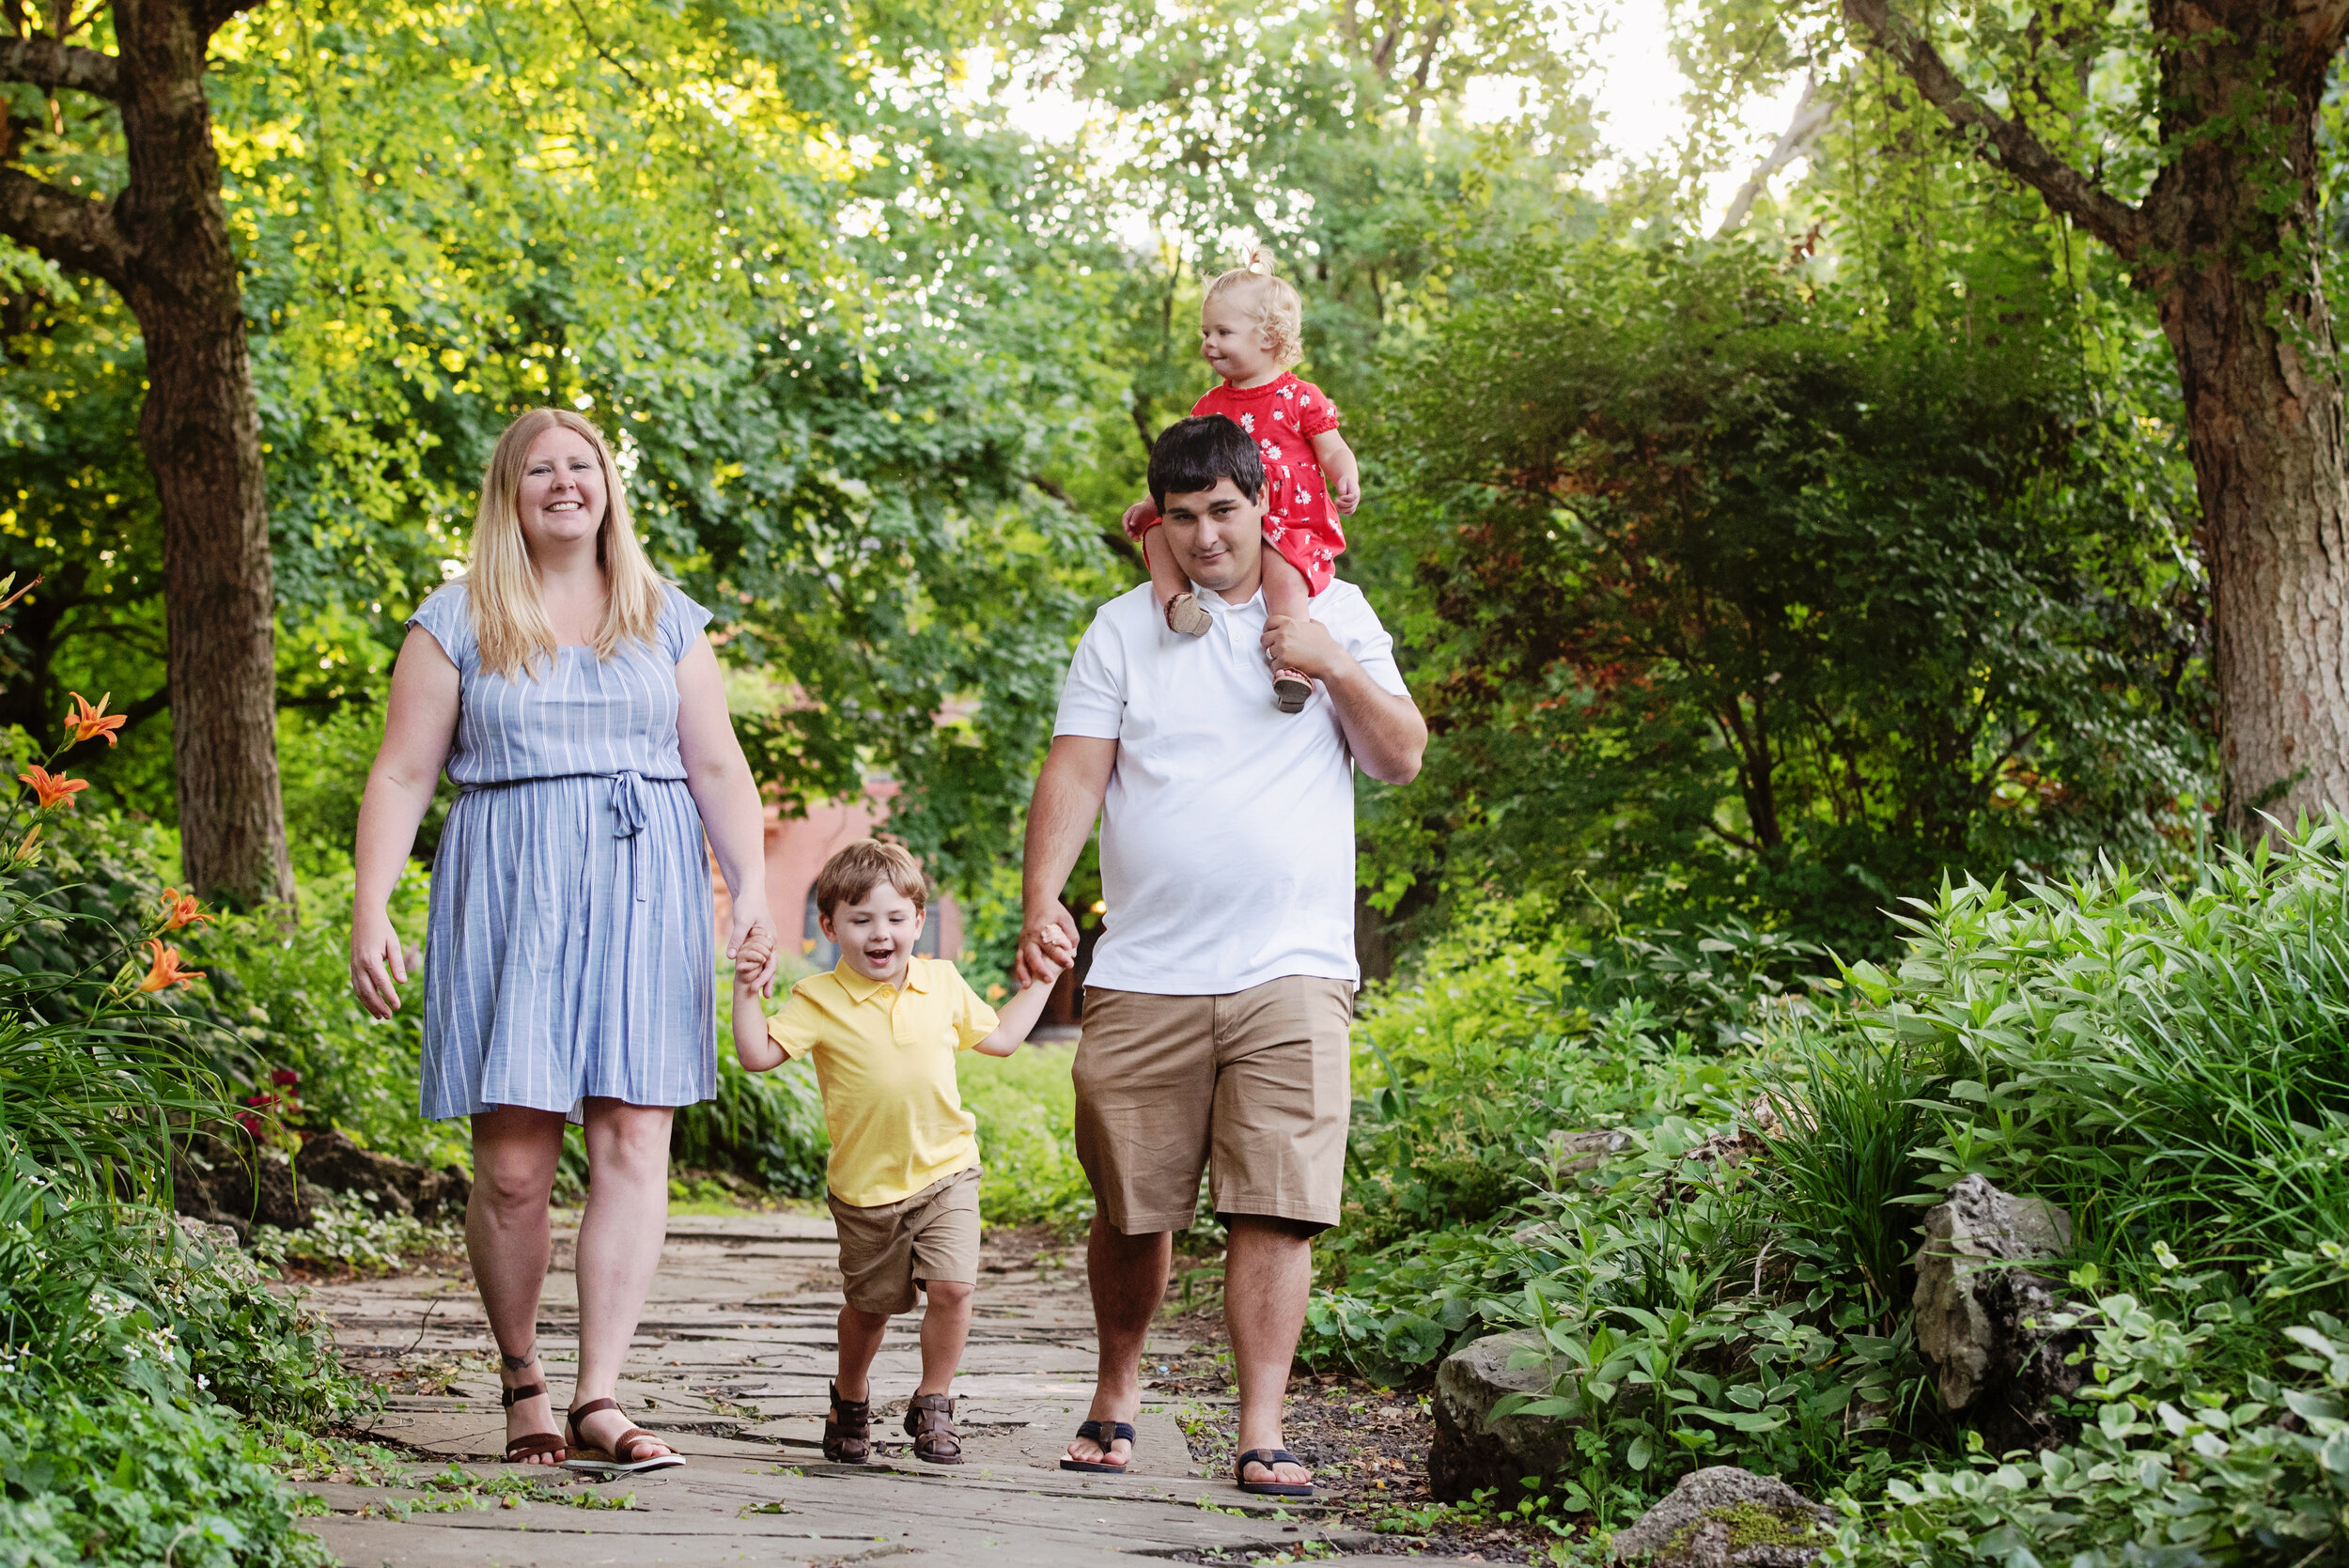 st-louis-family-photographer-spring-mini-sessions-2021-family-of-four-in-colorful-outfits-walking-along-path-at-lafayette-park-st-louis.jpg